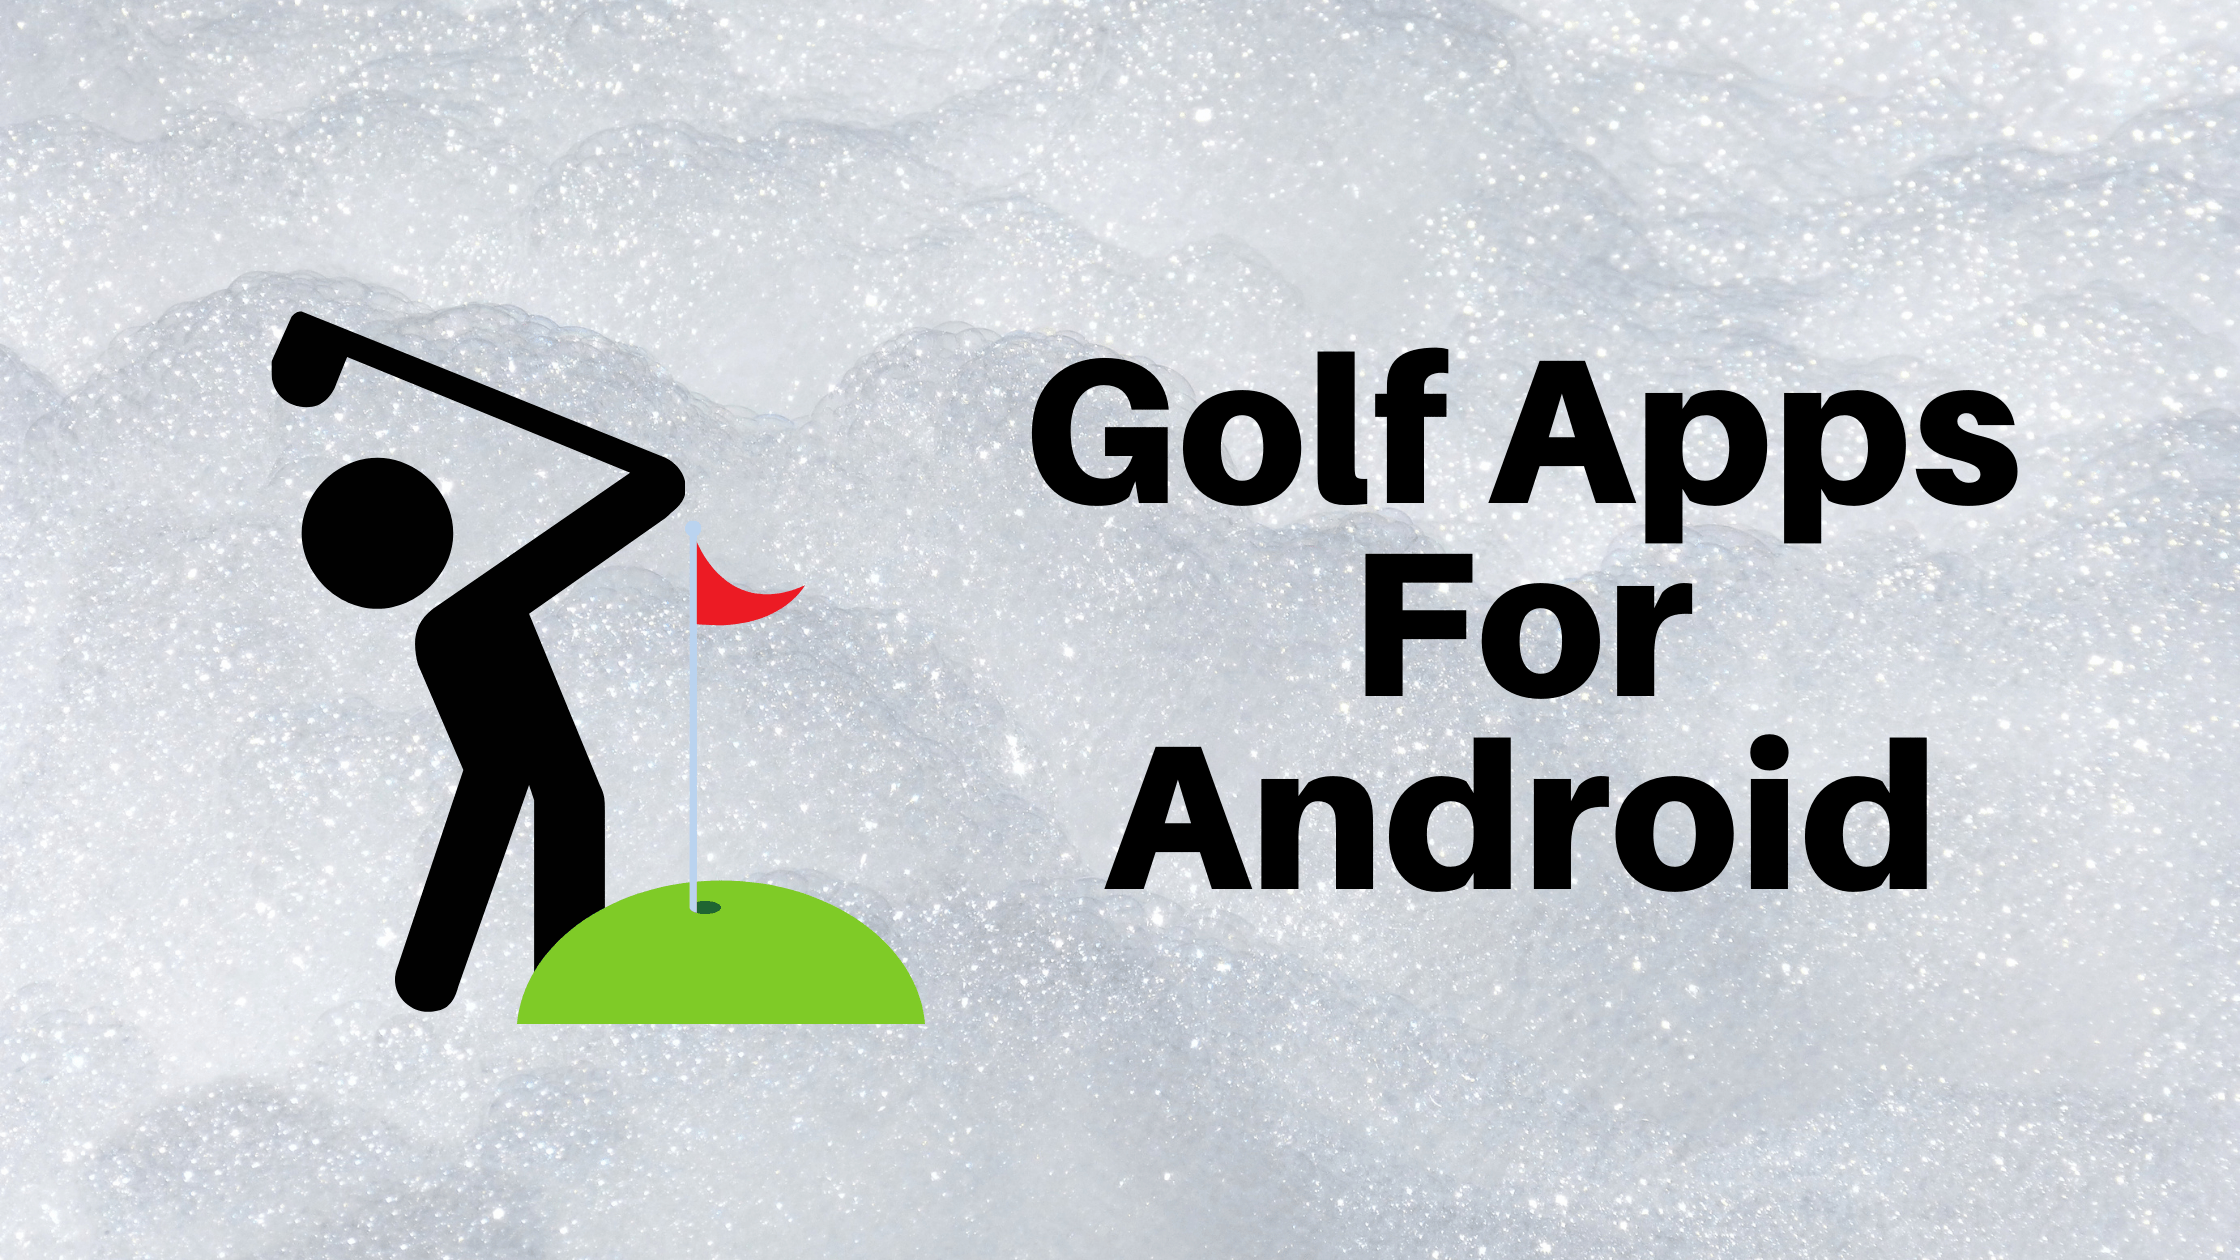 Golf Apps For Android